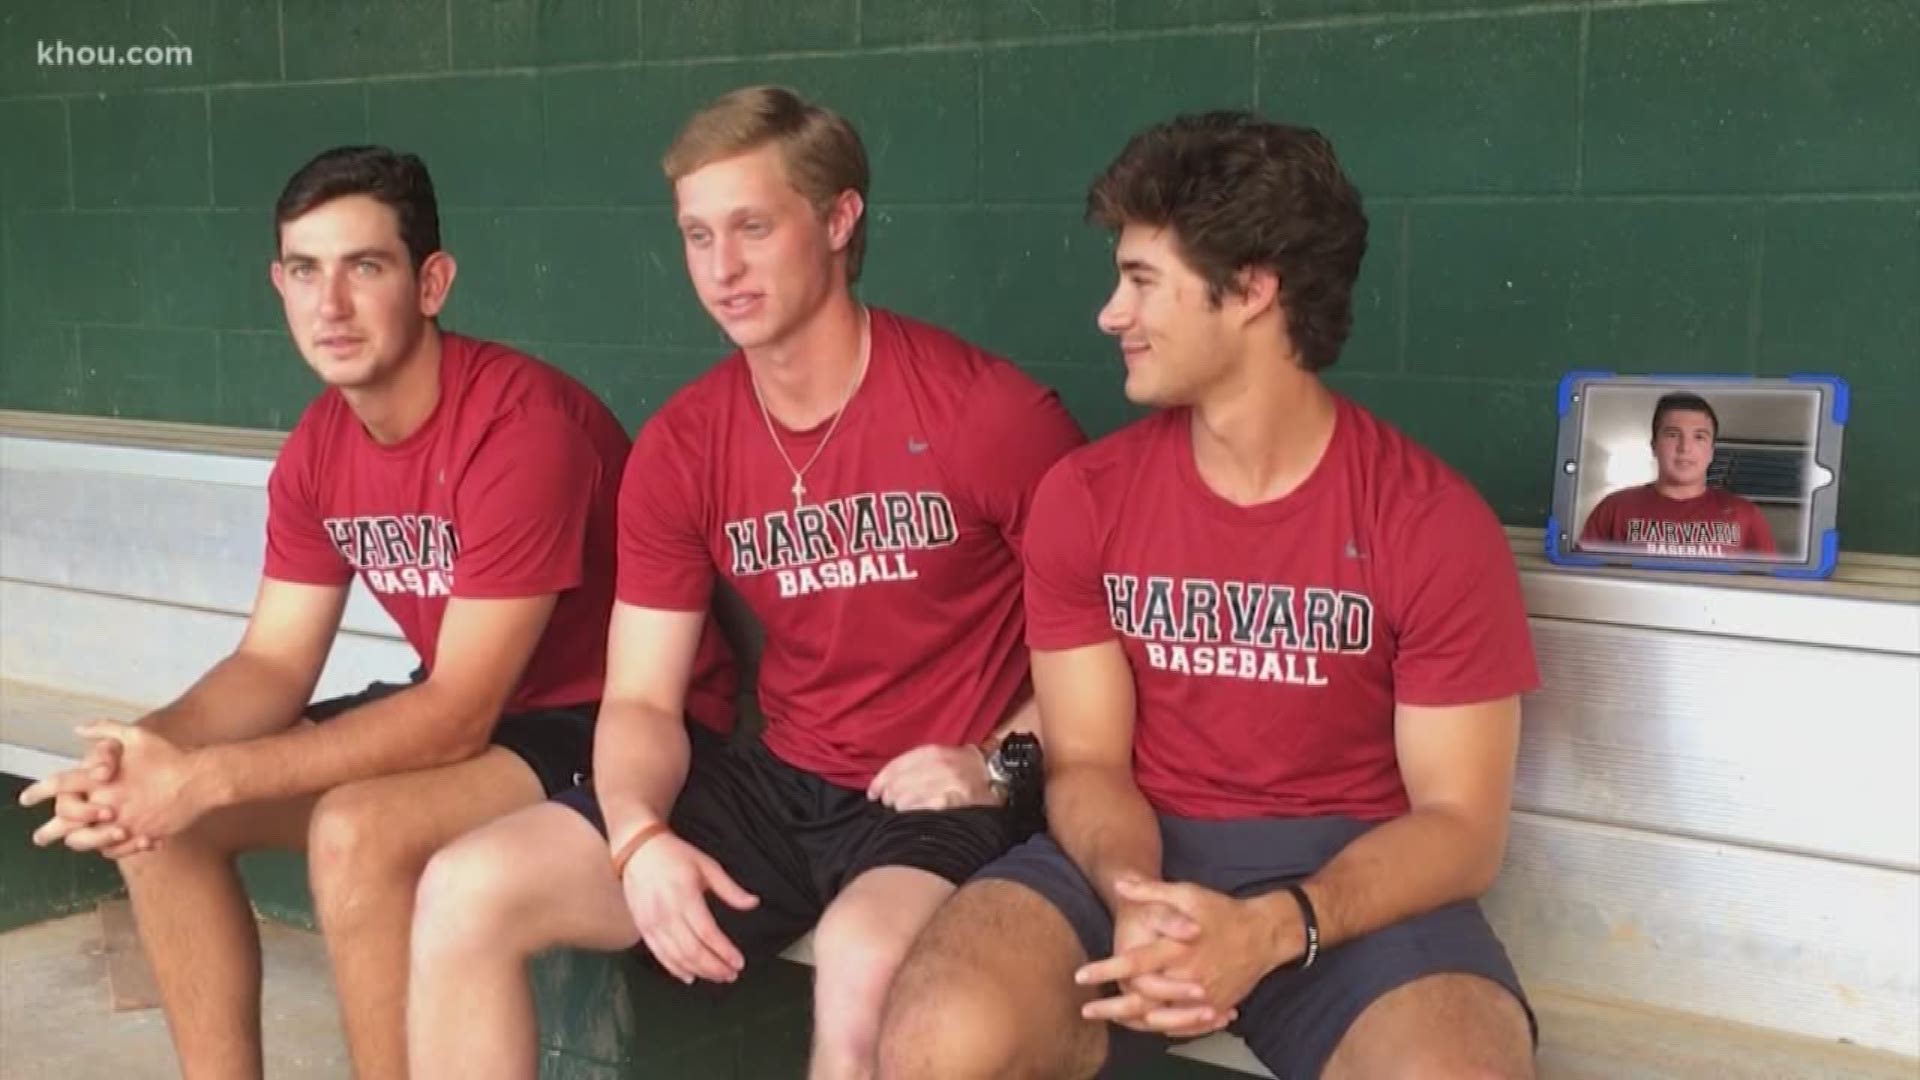 Four teenagers from Houston, who have been playing baseball together for years, are taking their skills to Harvard.